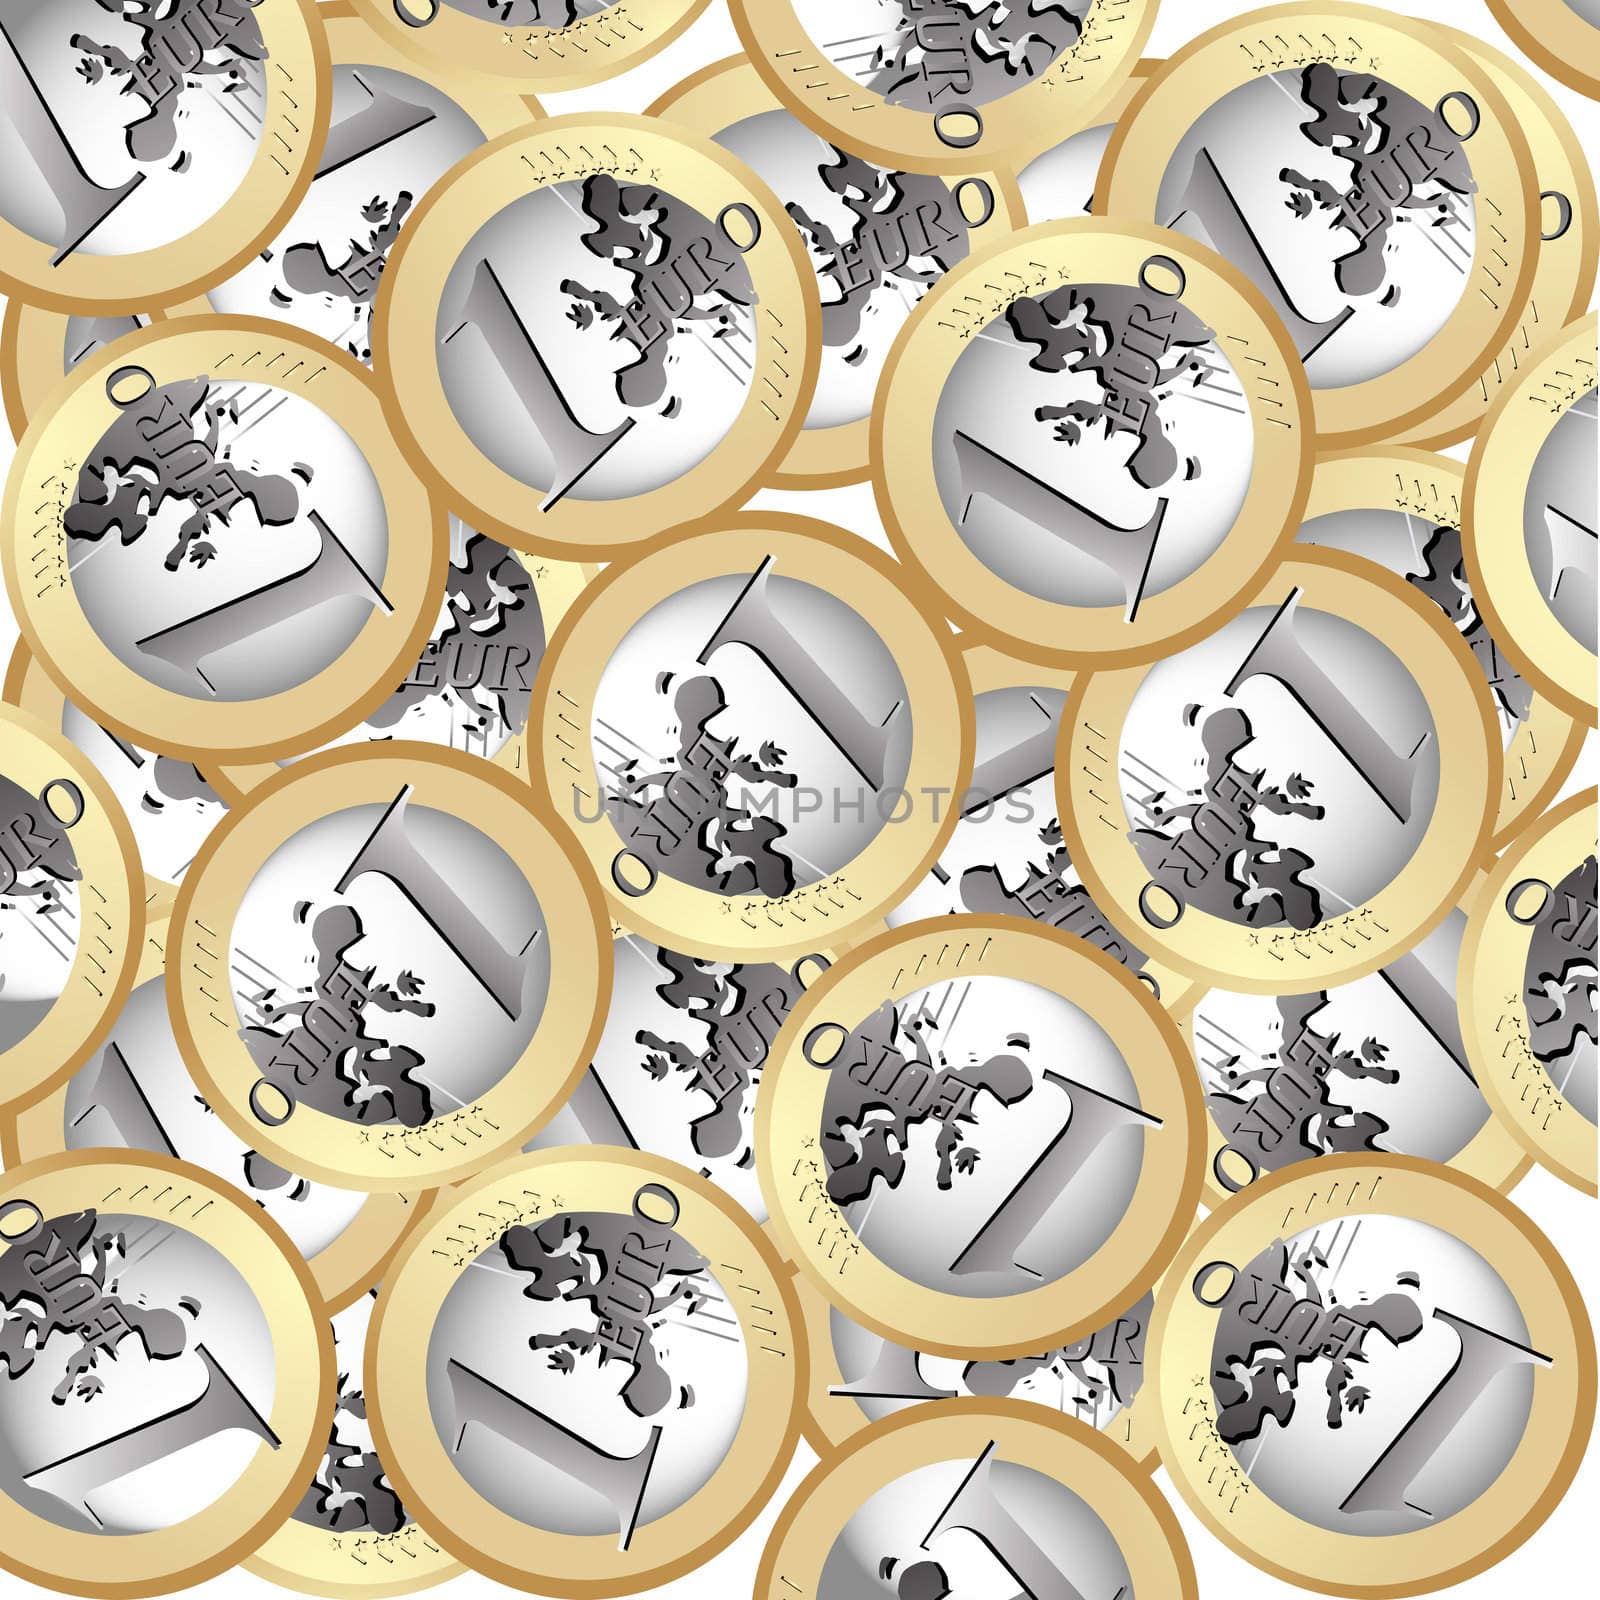 Euro coins background by Lirch